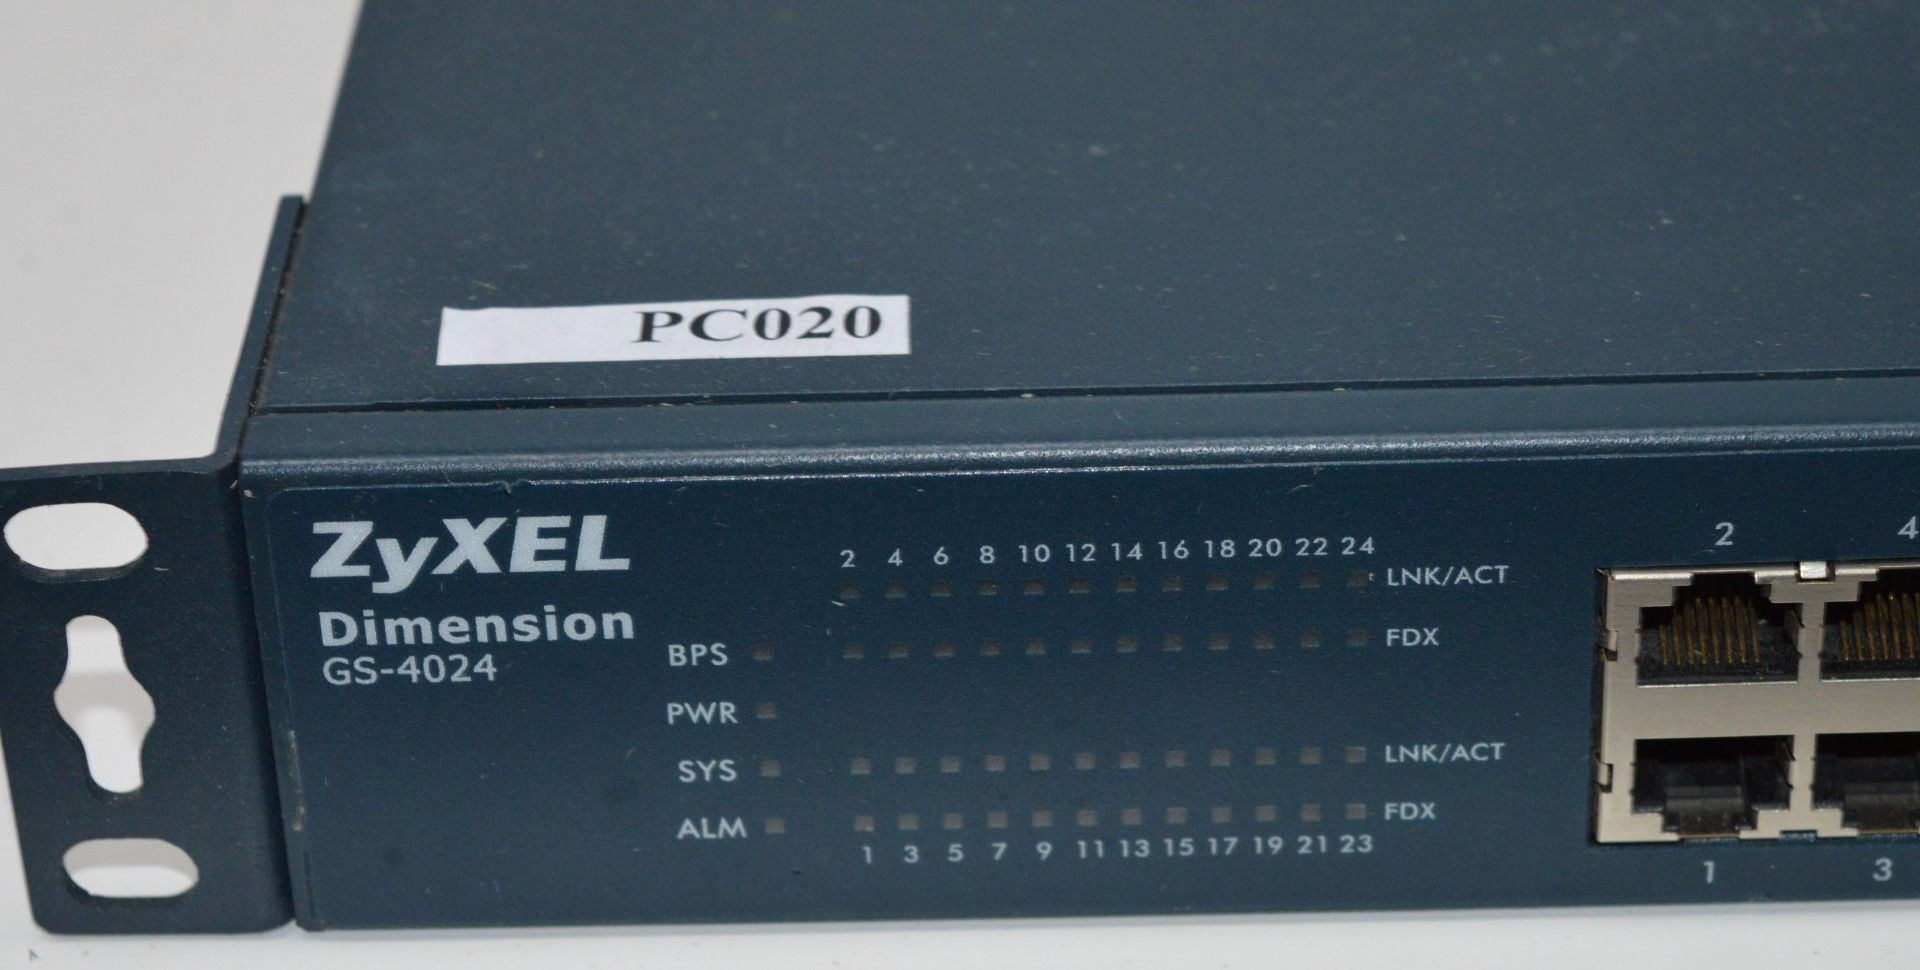 1 x Zyxel 24 Port Layer 2 Managed Gigibit Switch With Fiber Ports - Model GS-2024 - CL159 - Ref - Image 5 of 8